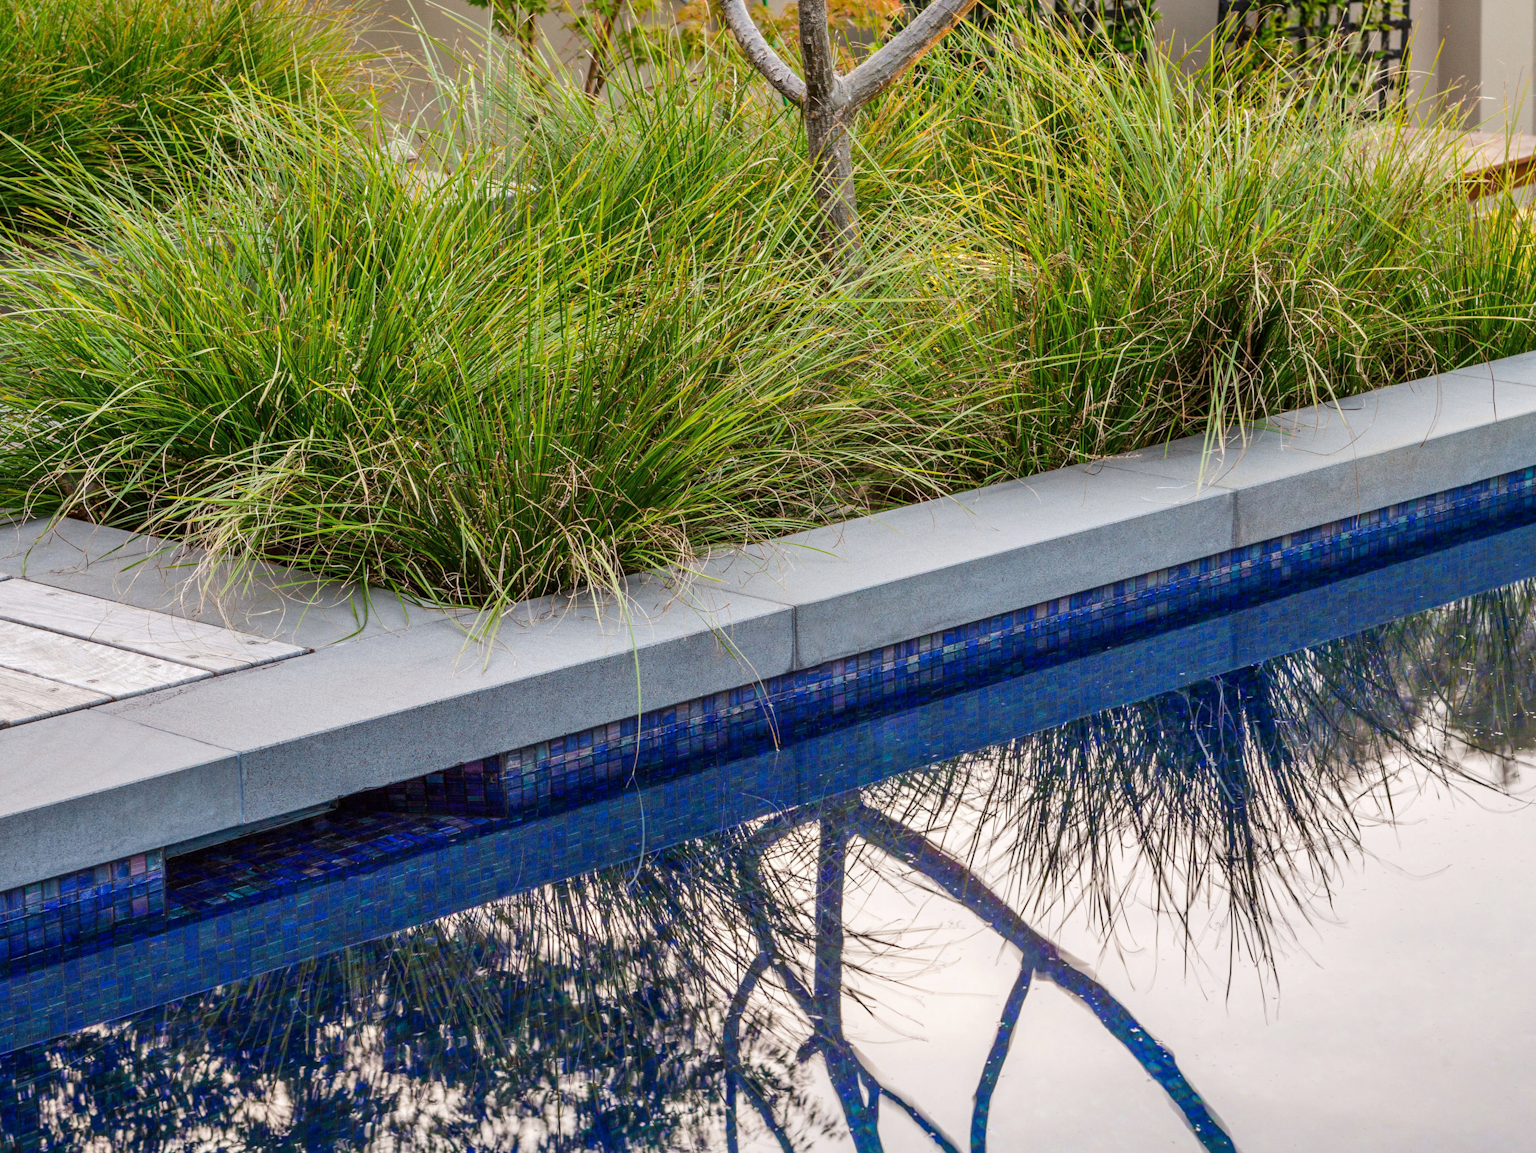 Bluestone rebated coping units at pool edge with timber decking surround